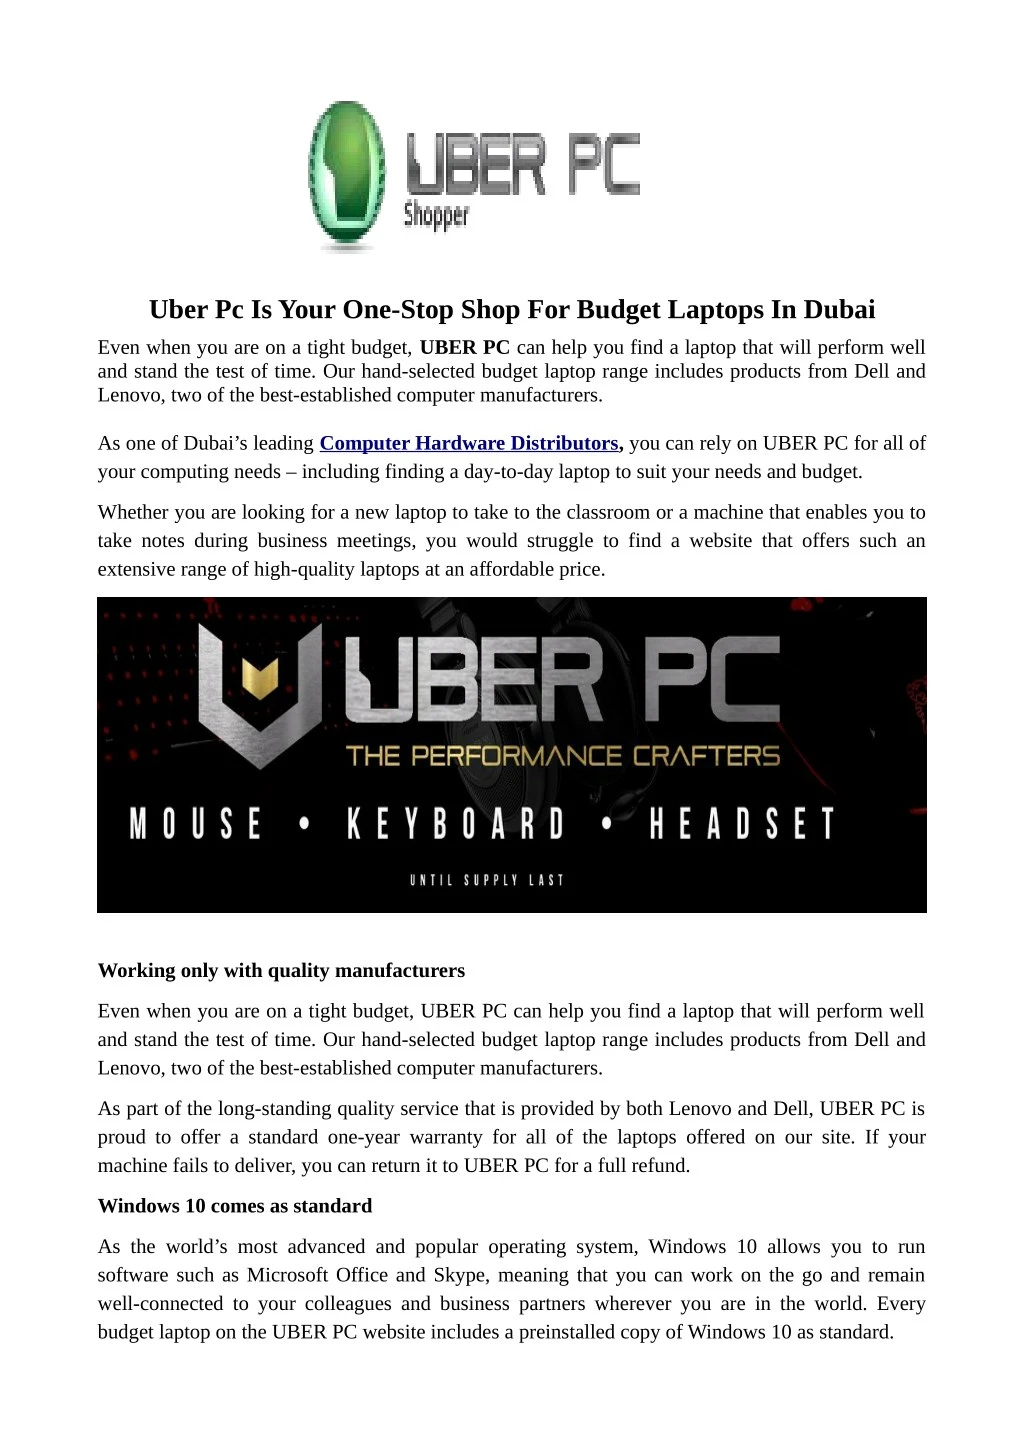 uber pc is your one stop shop for budget laptops